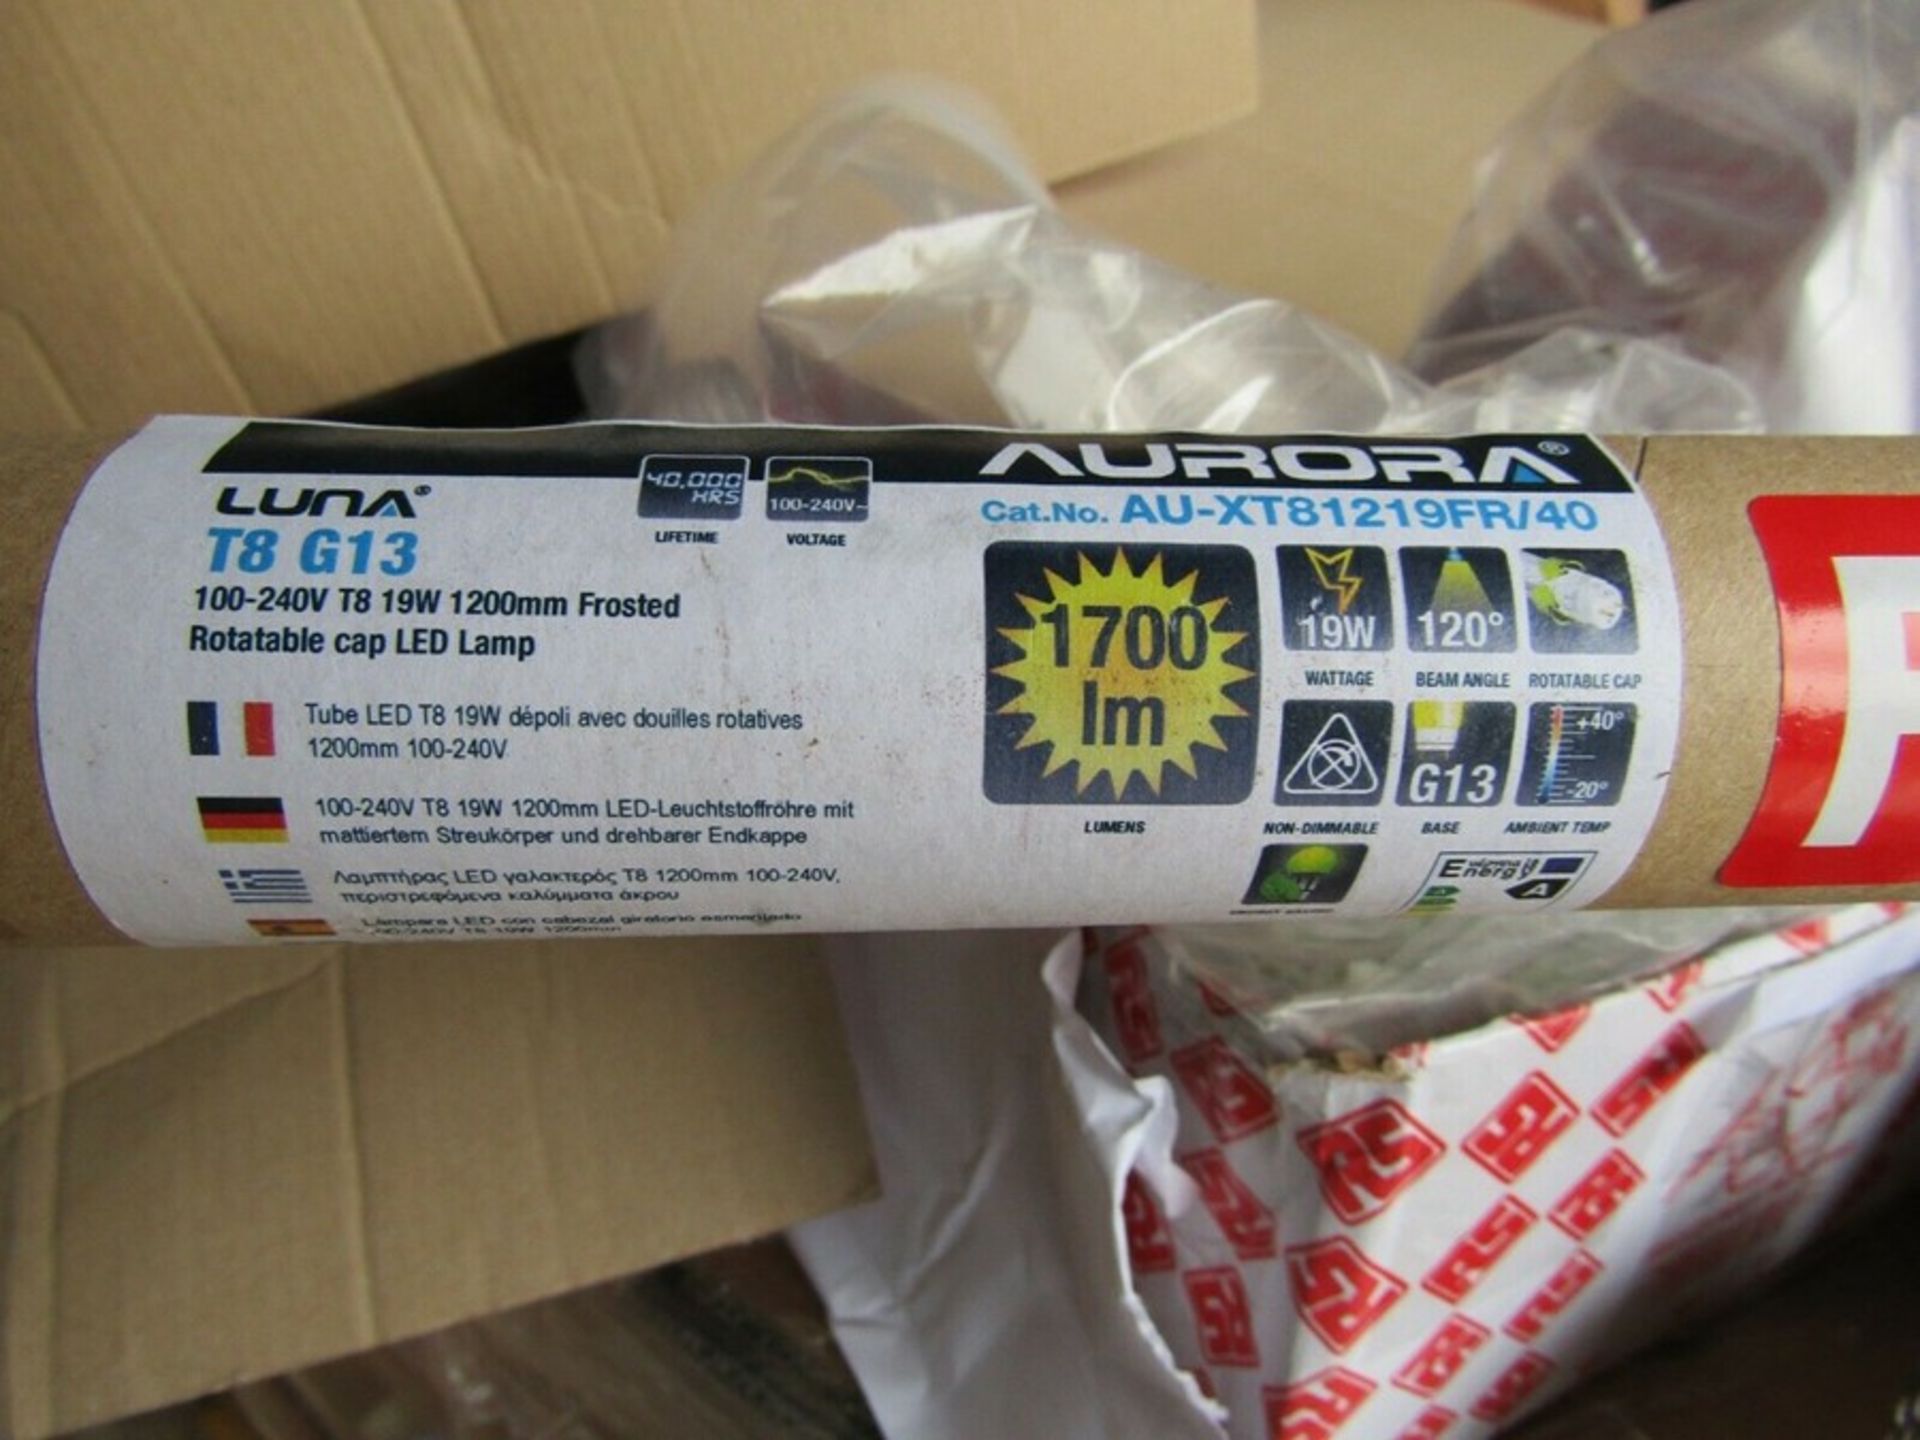 10 x Aurora 19W 1700lm T8 Frosted LED Fluorescent Tube 4000K, G13 Cap - H9RM 7770239 - Image 2 of 2